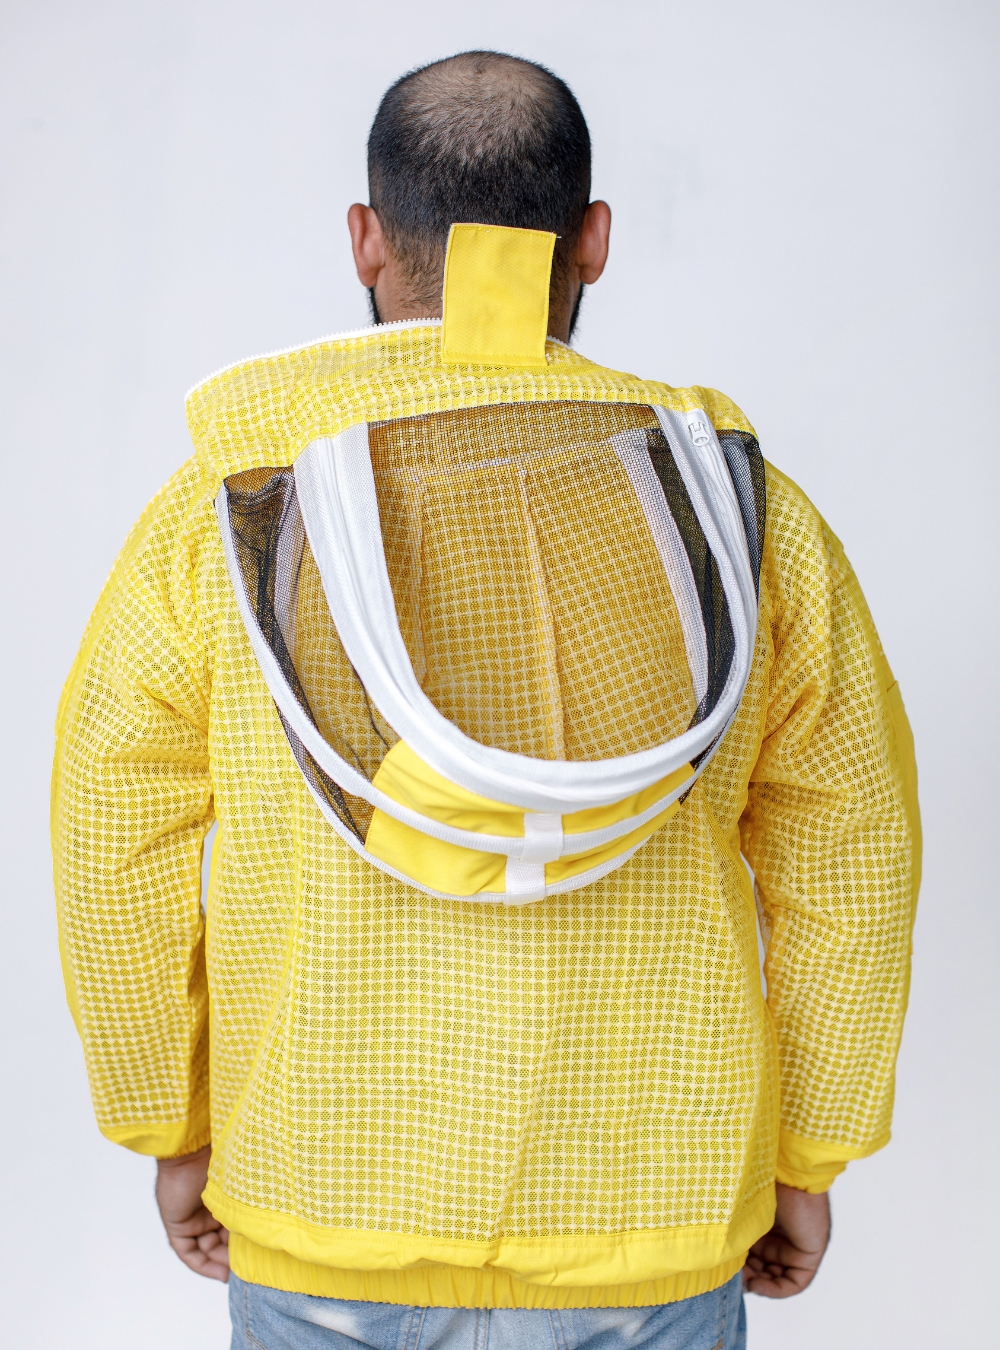 A back view of Golden Hive Guardian Beekeeping Jacket for beekeeping, with a detachable Fencing Veil and ample storage pockets.